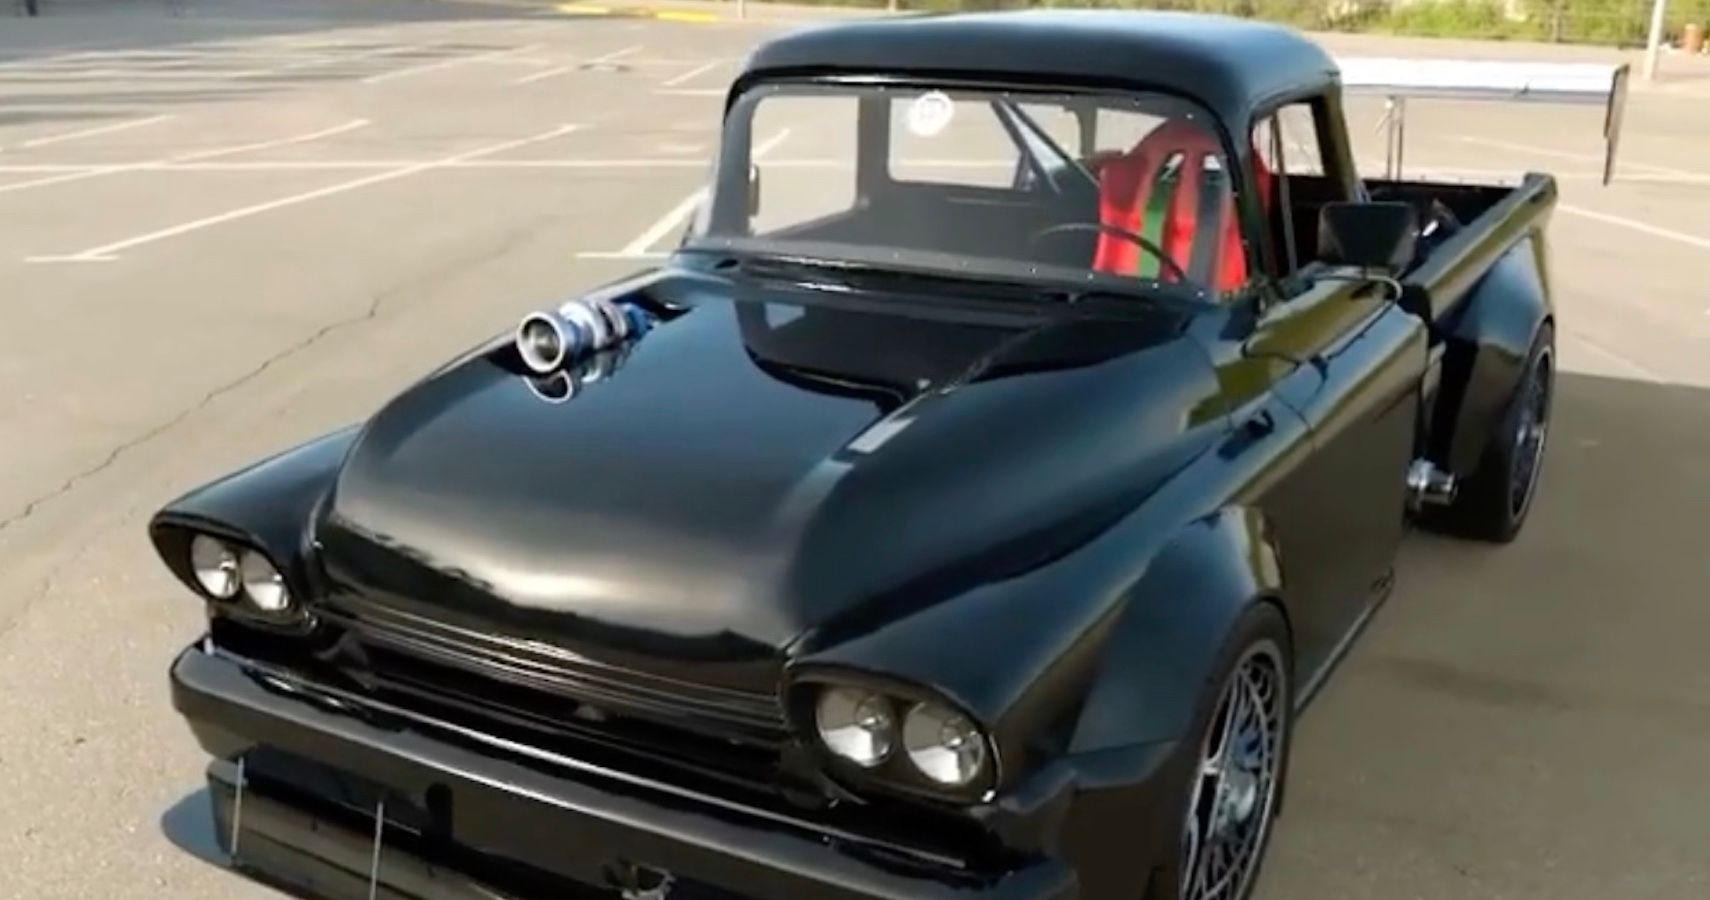 Outlandish 1958 Chevy Apache Boasts Beastly Front Splitter And Giant Rear Wing